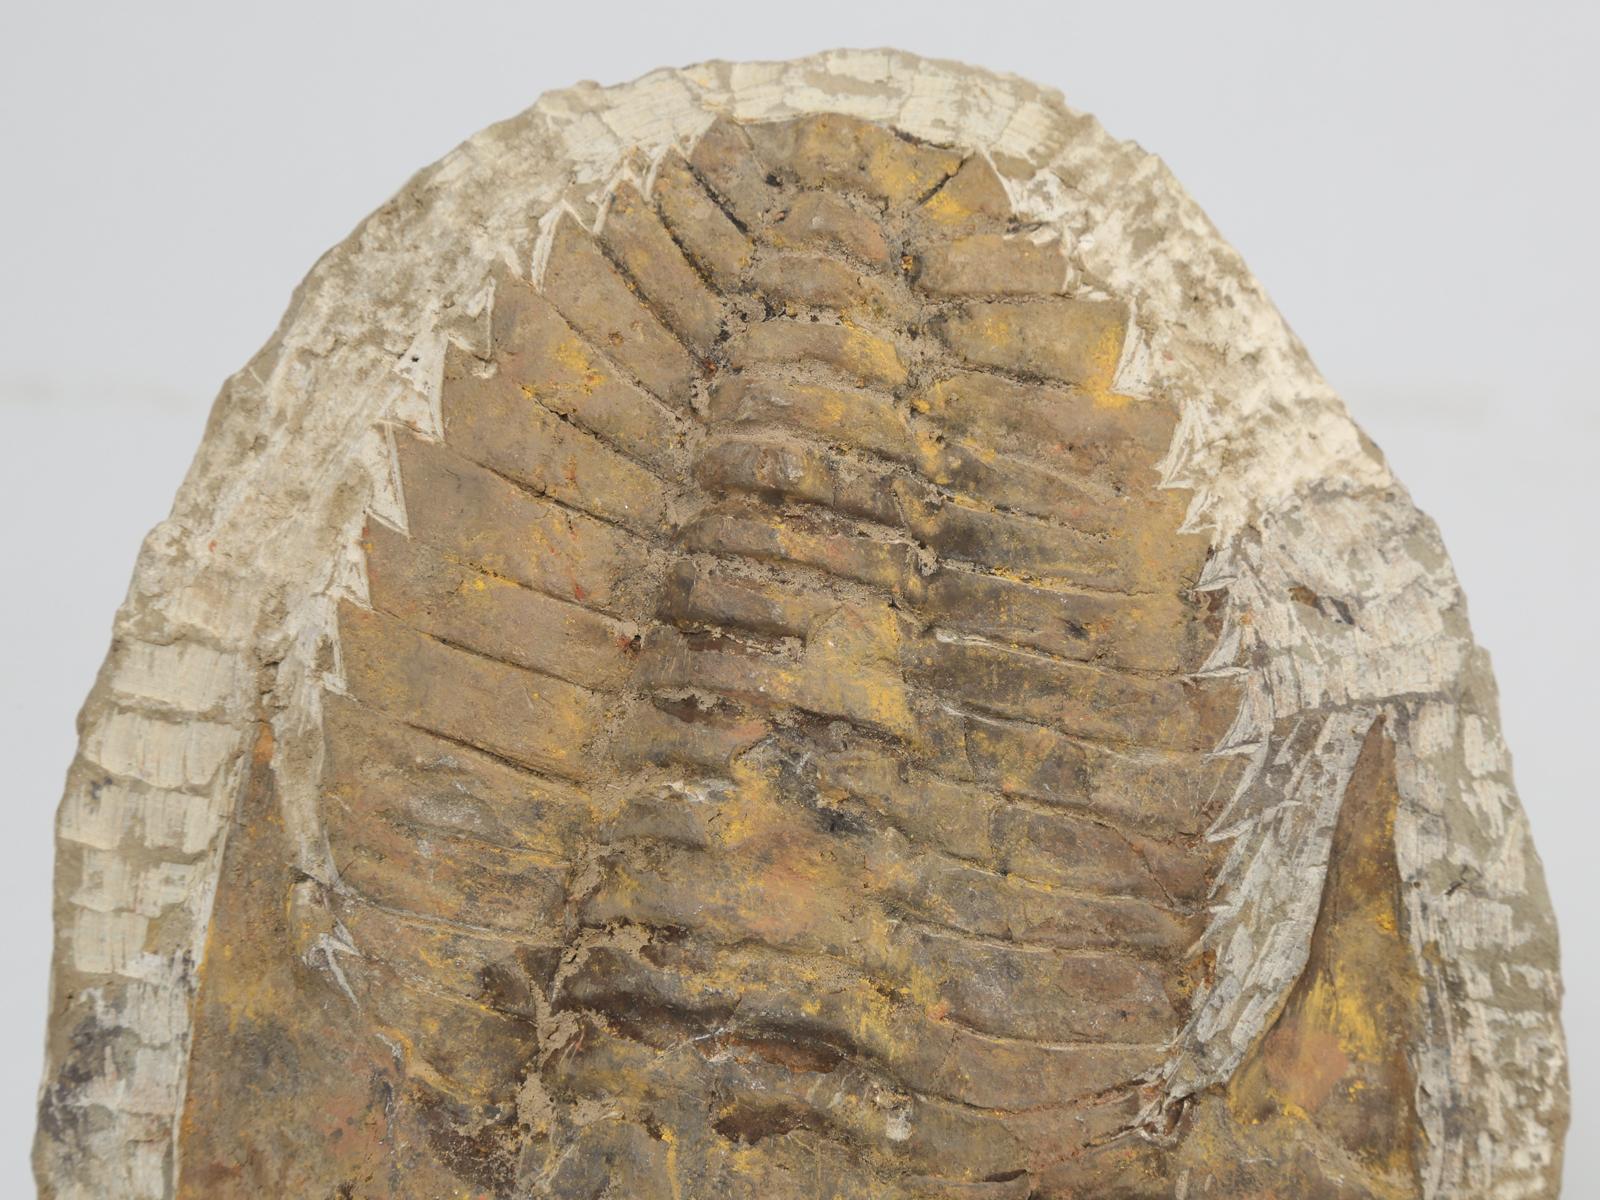 Trilobites, were an early arthropod at the beginning of the Paleozoic era in the Cambrian period. They flourished in the ancient seas for close to 300 million years. Our Cambropallas Trilobite fossil was located in Djbel Ougrat, Morocco.

**Stand